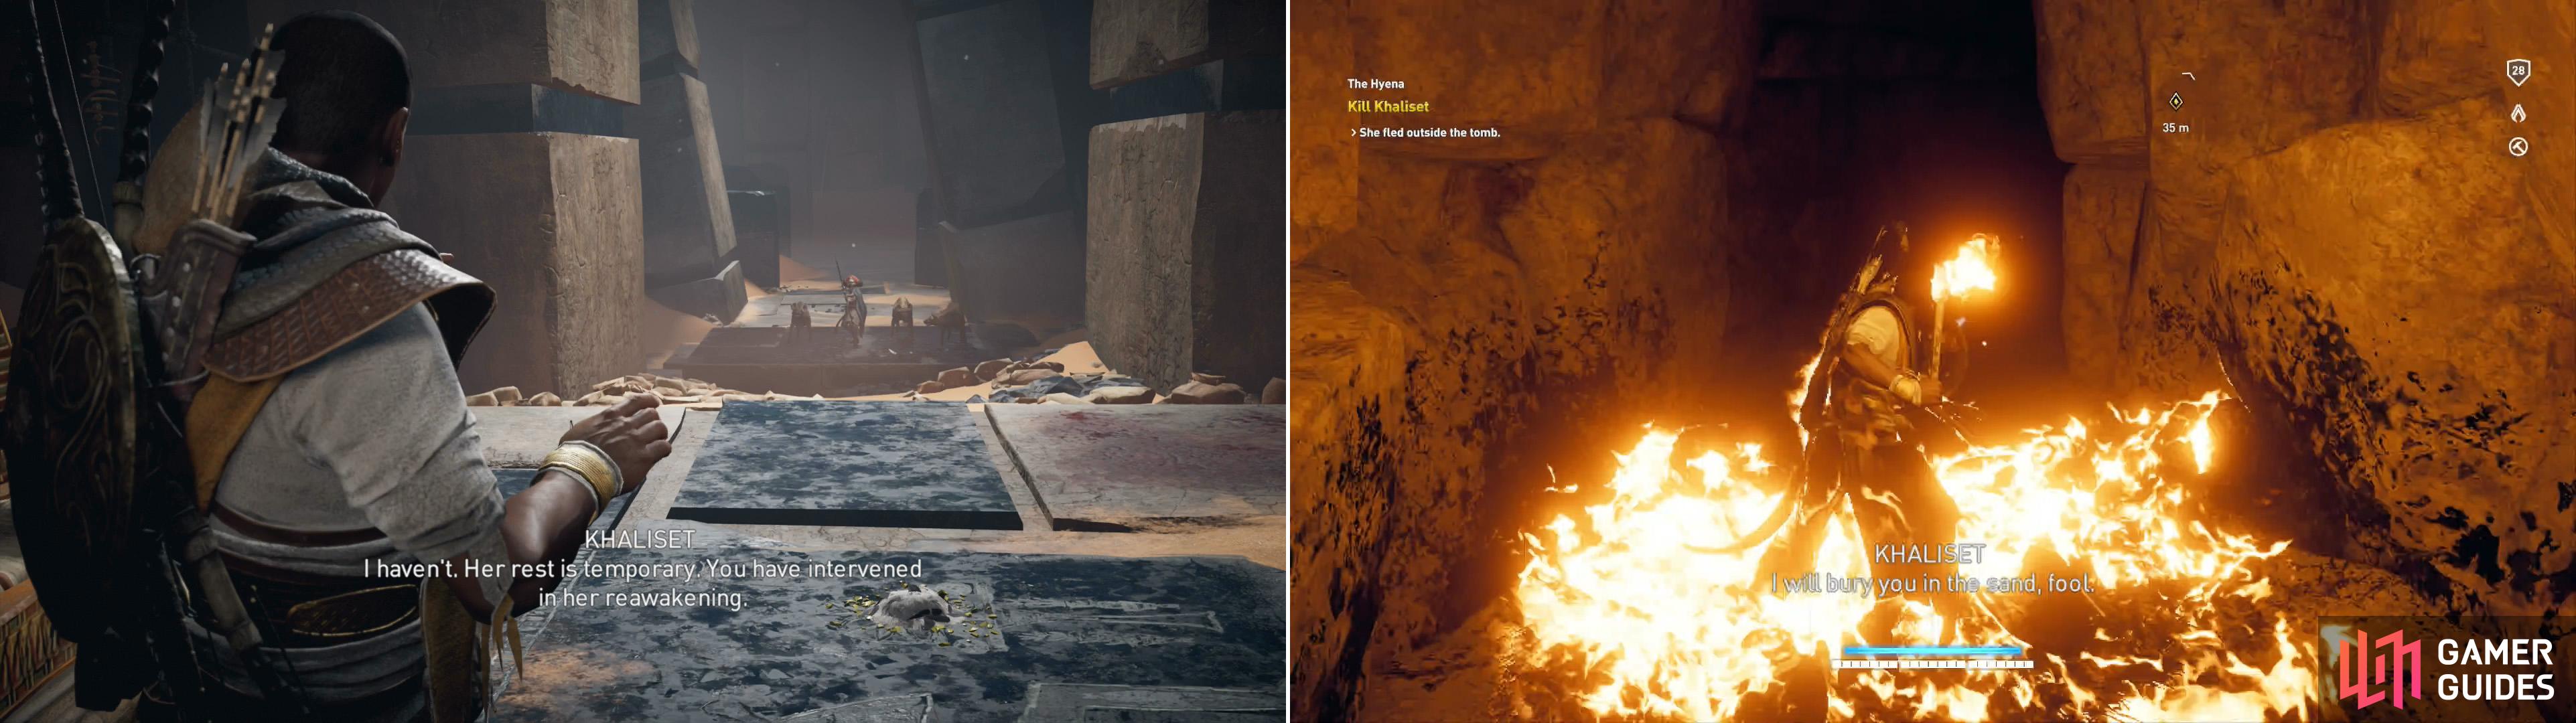 Bayek will encounter Khaliset - The Hyena - in the depths of the tomb (left). Chase after her, but be wary of her traps (right).